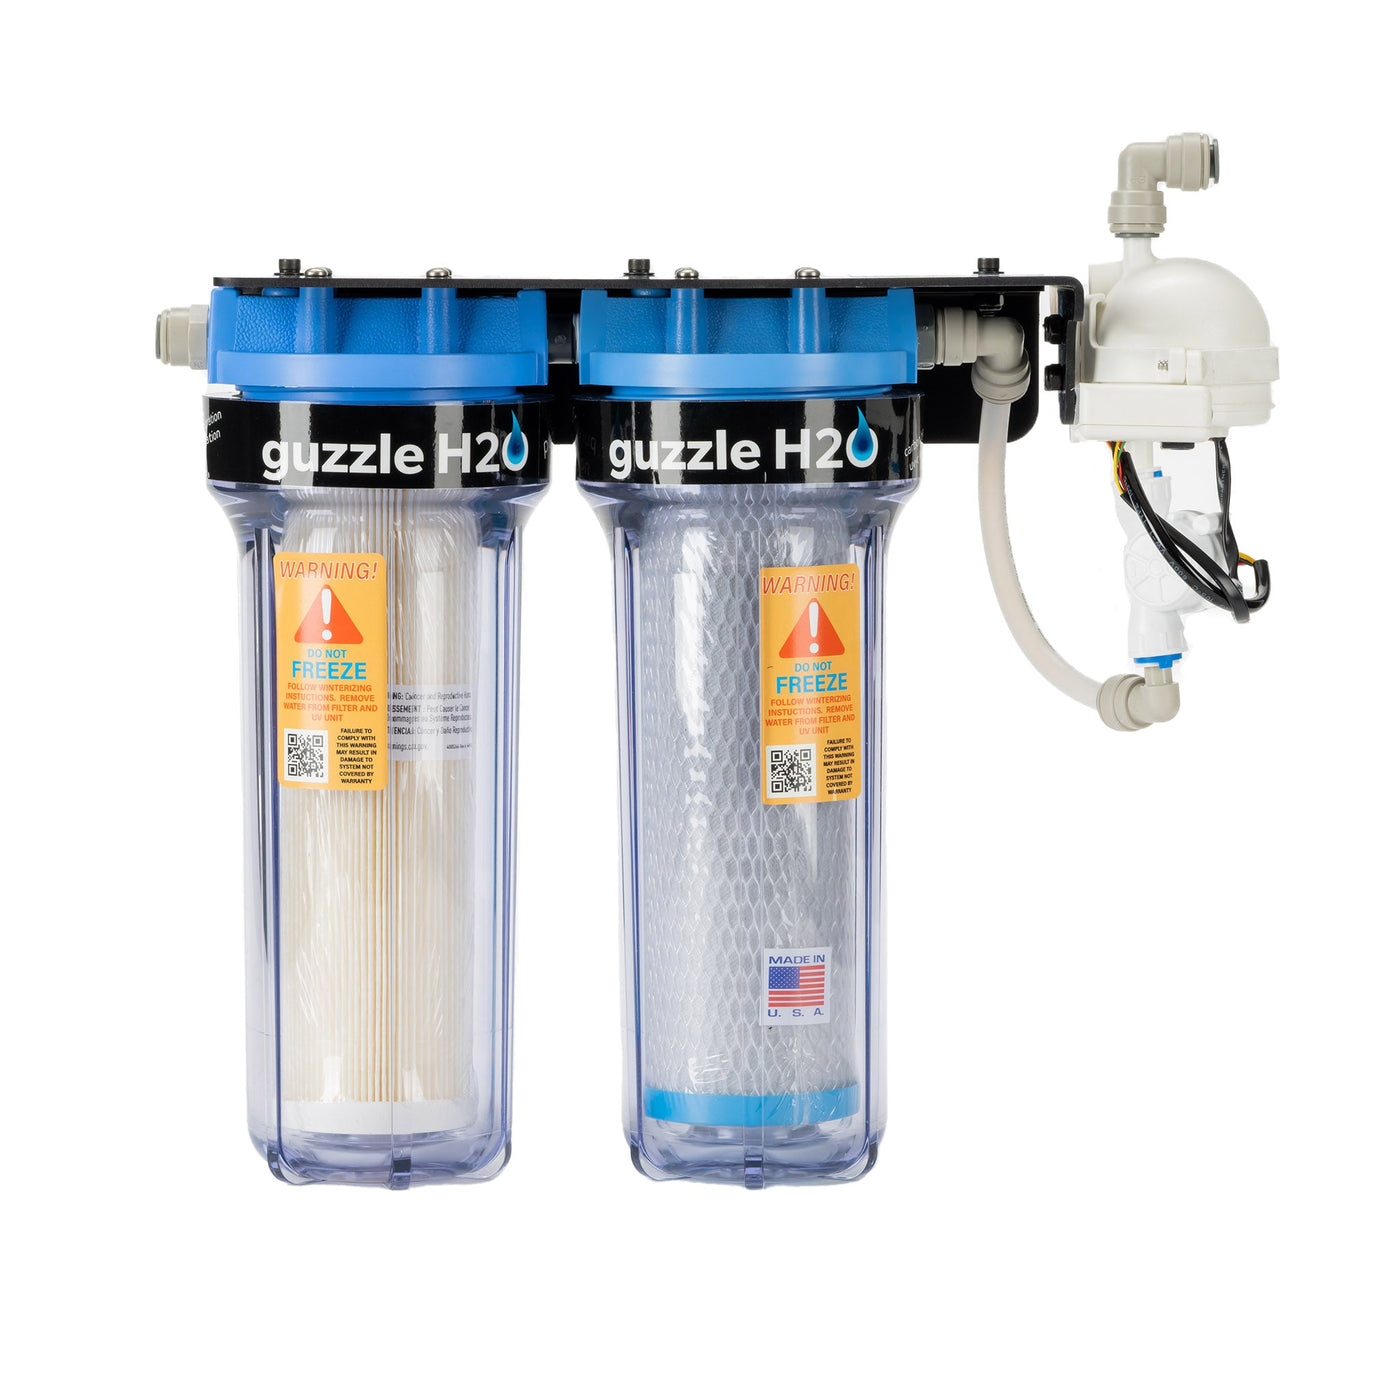 Guzzle H2O Stealth 2x10 Water Purification and Filtration System